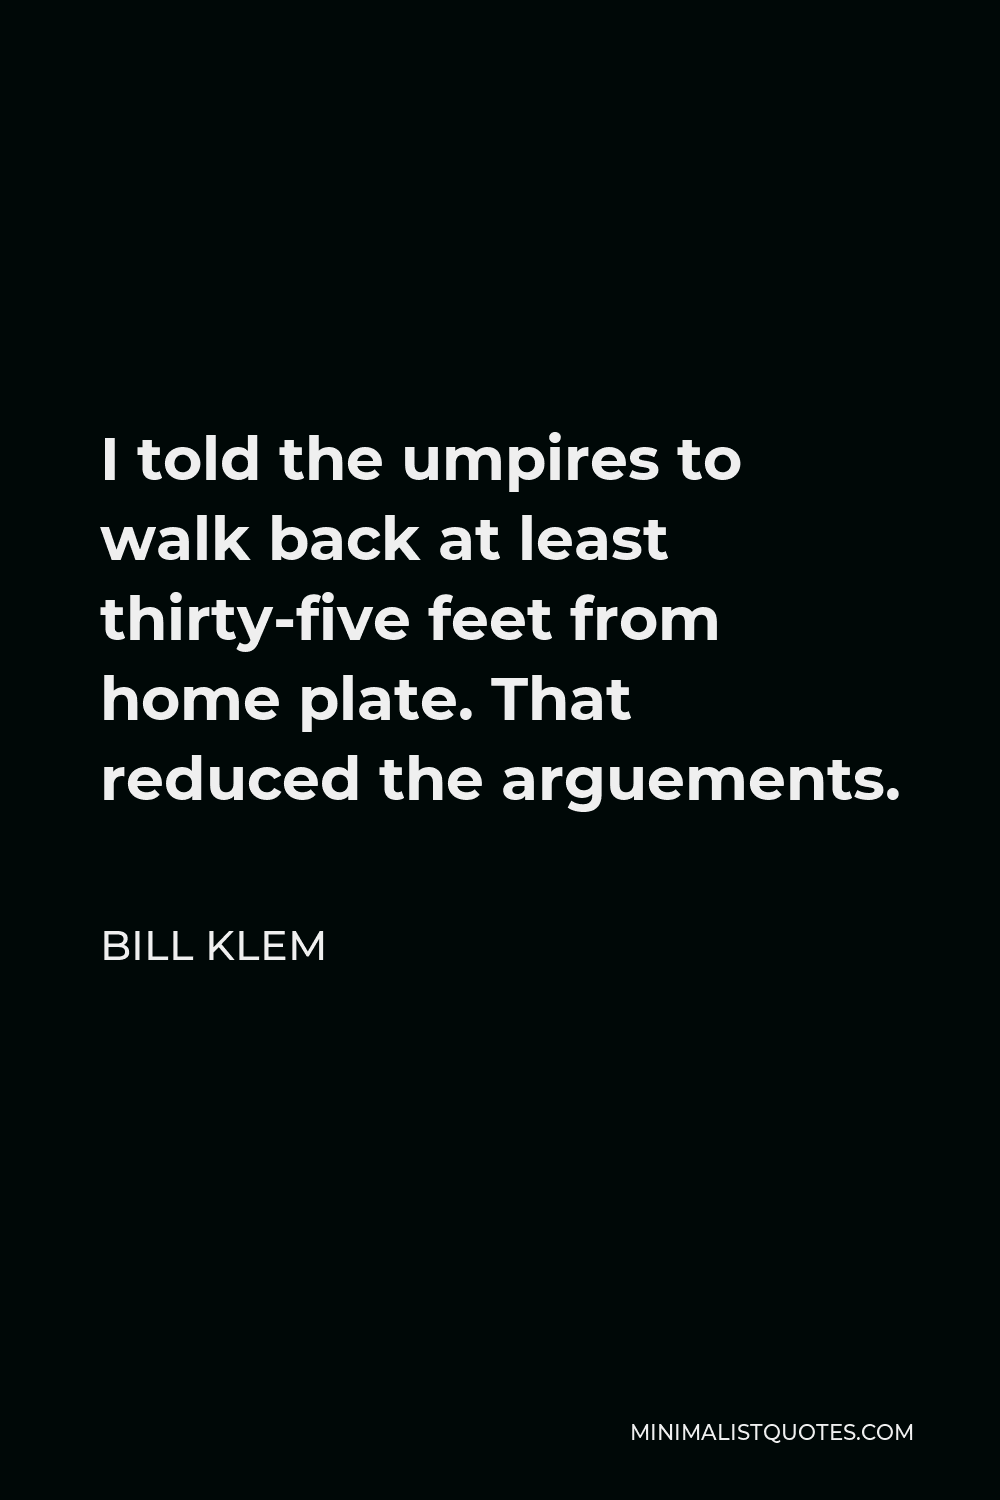 Bill Klem Quote - I told the umpires to walk back at least thirty-five feet from home plate. That reduced the arguements.